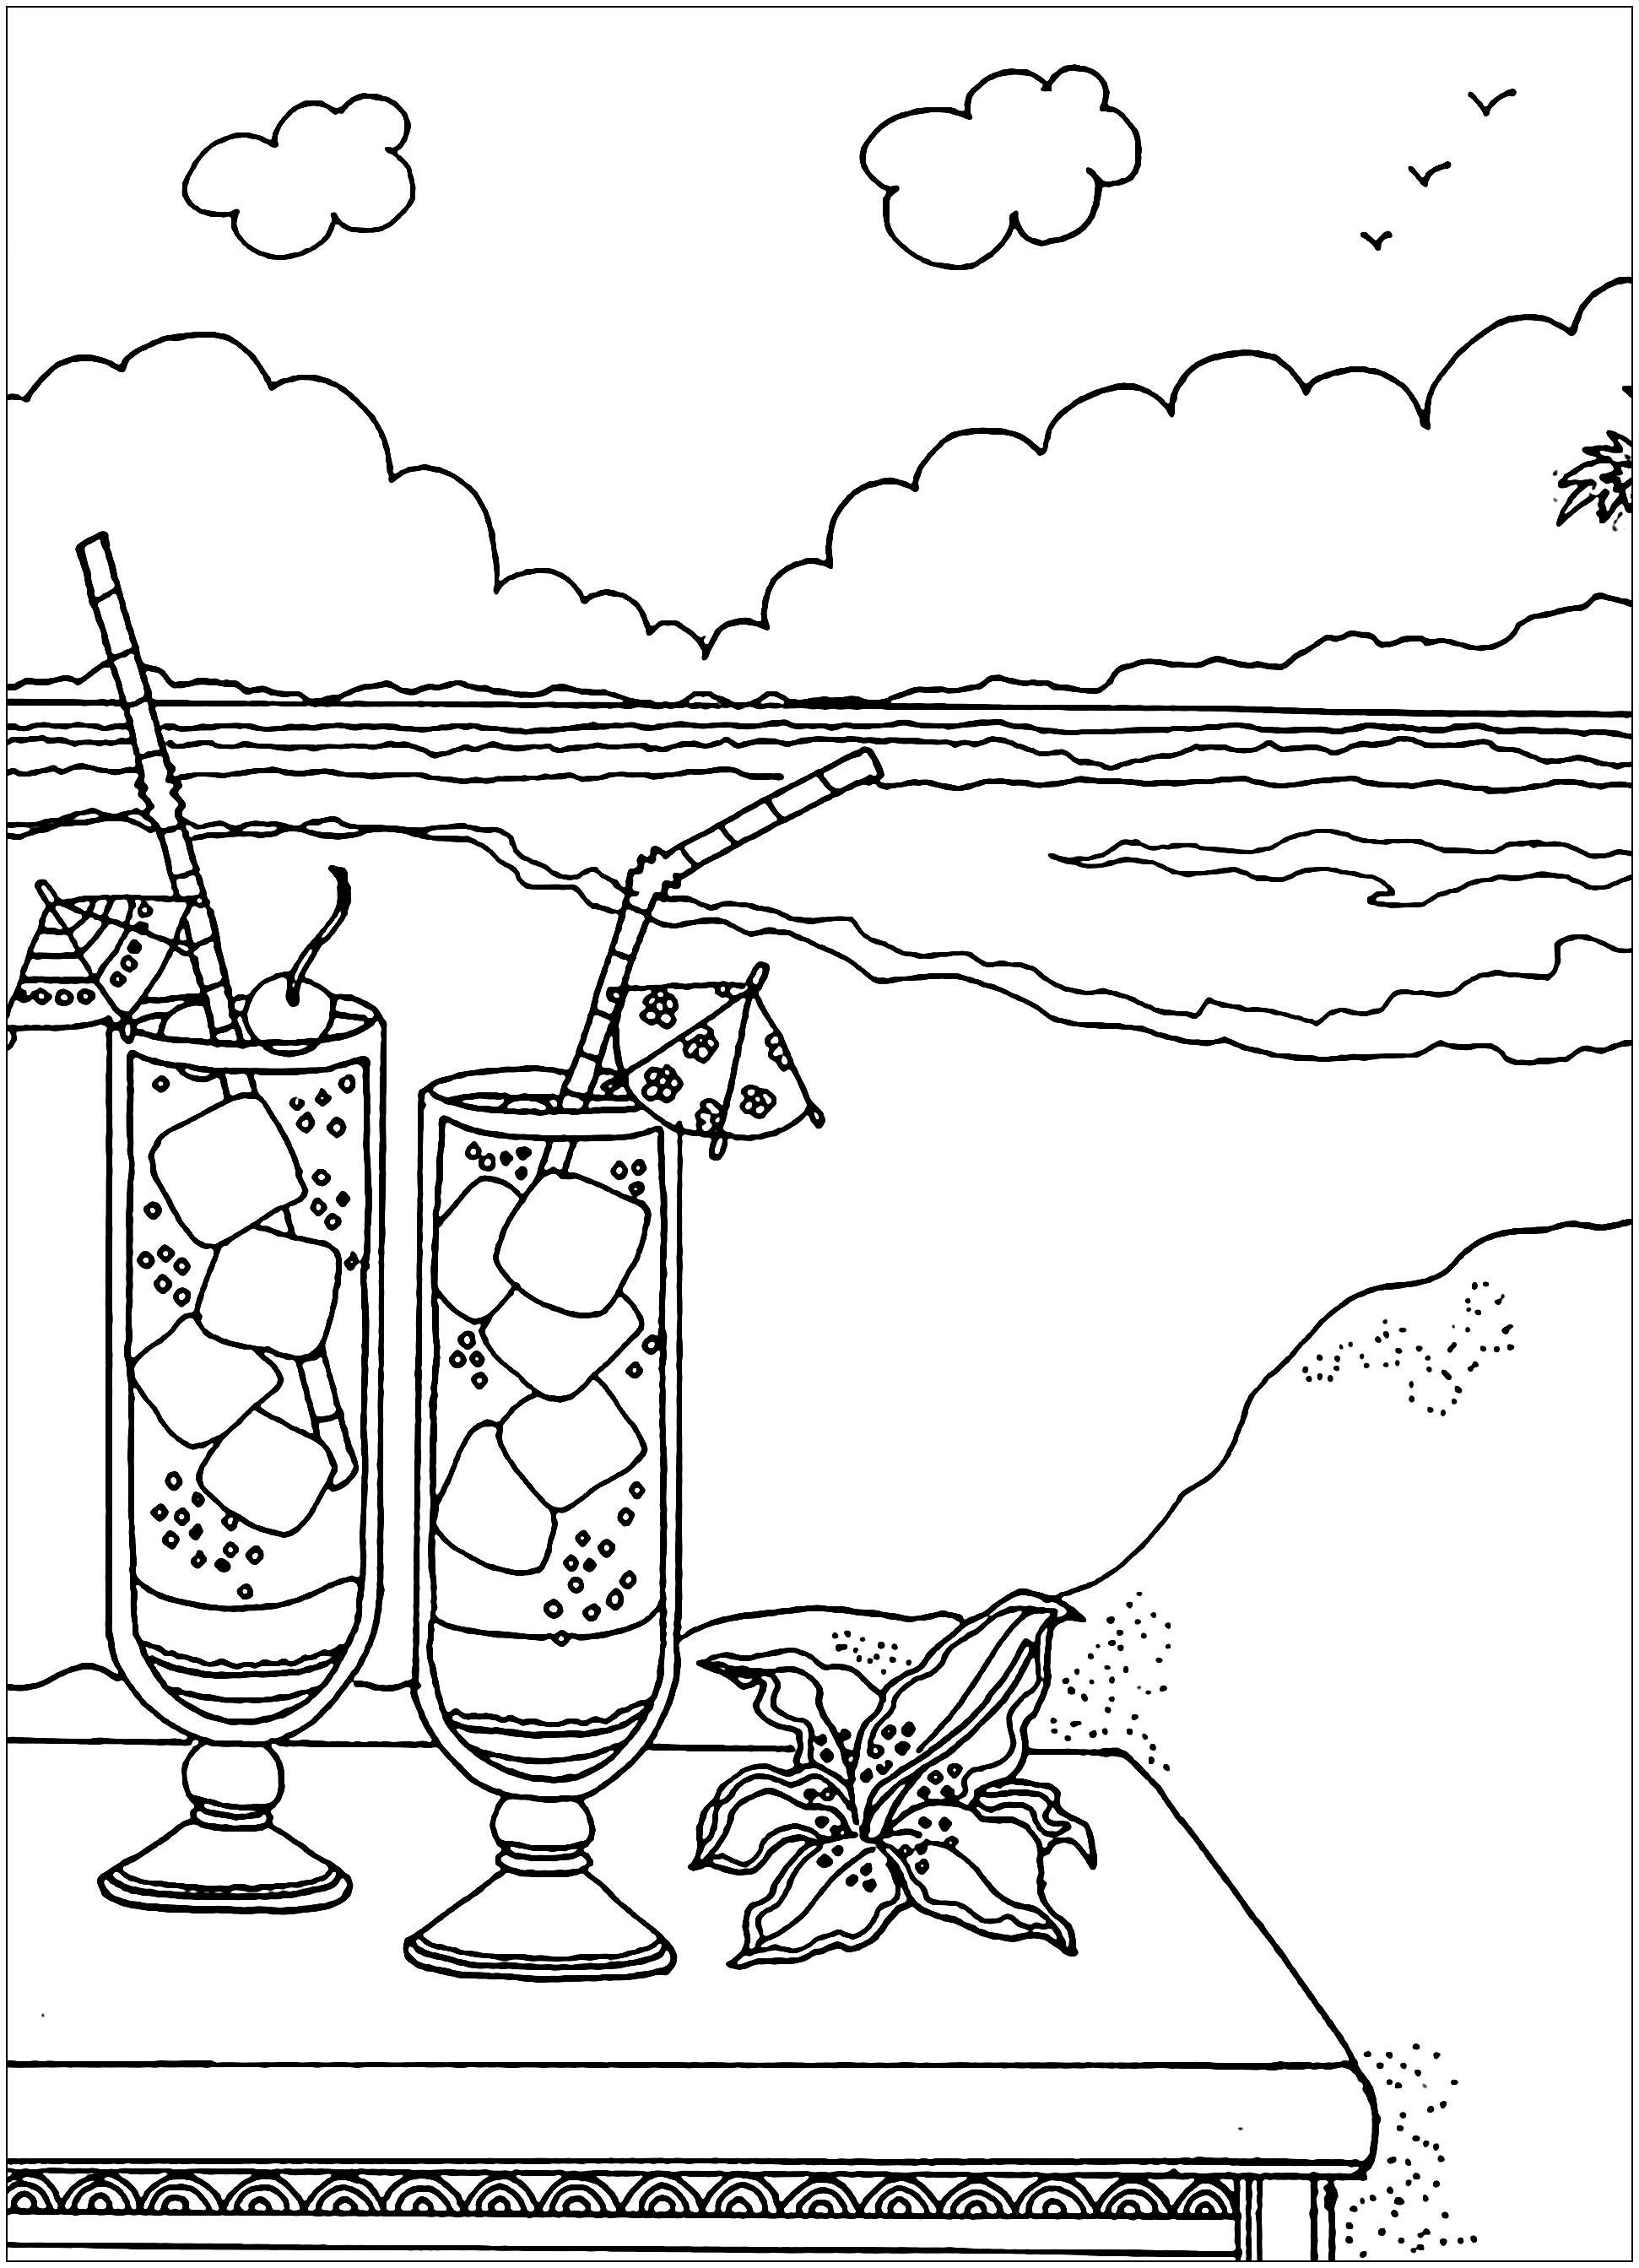 Cocktails on the beach - Anti stress Adult Coloring Pages